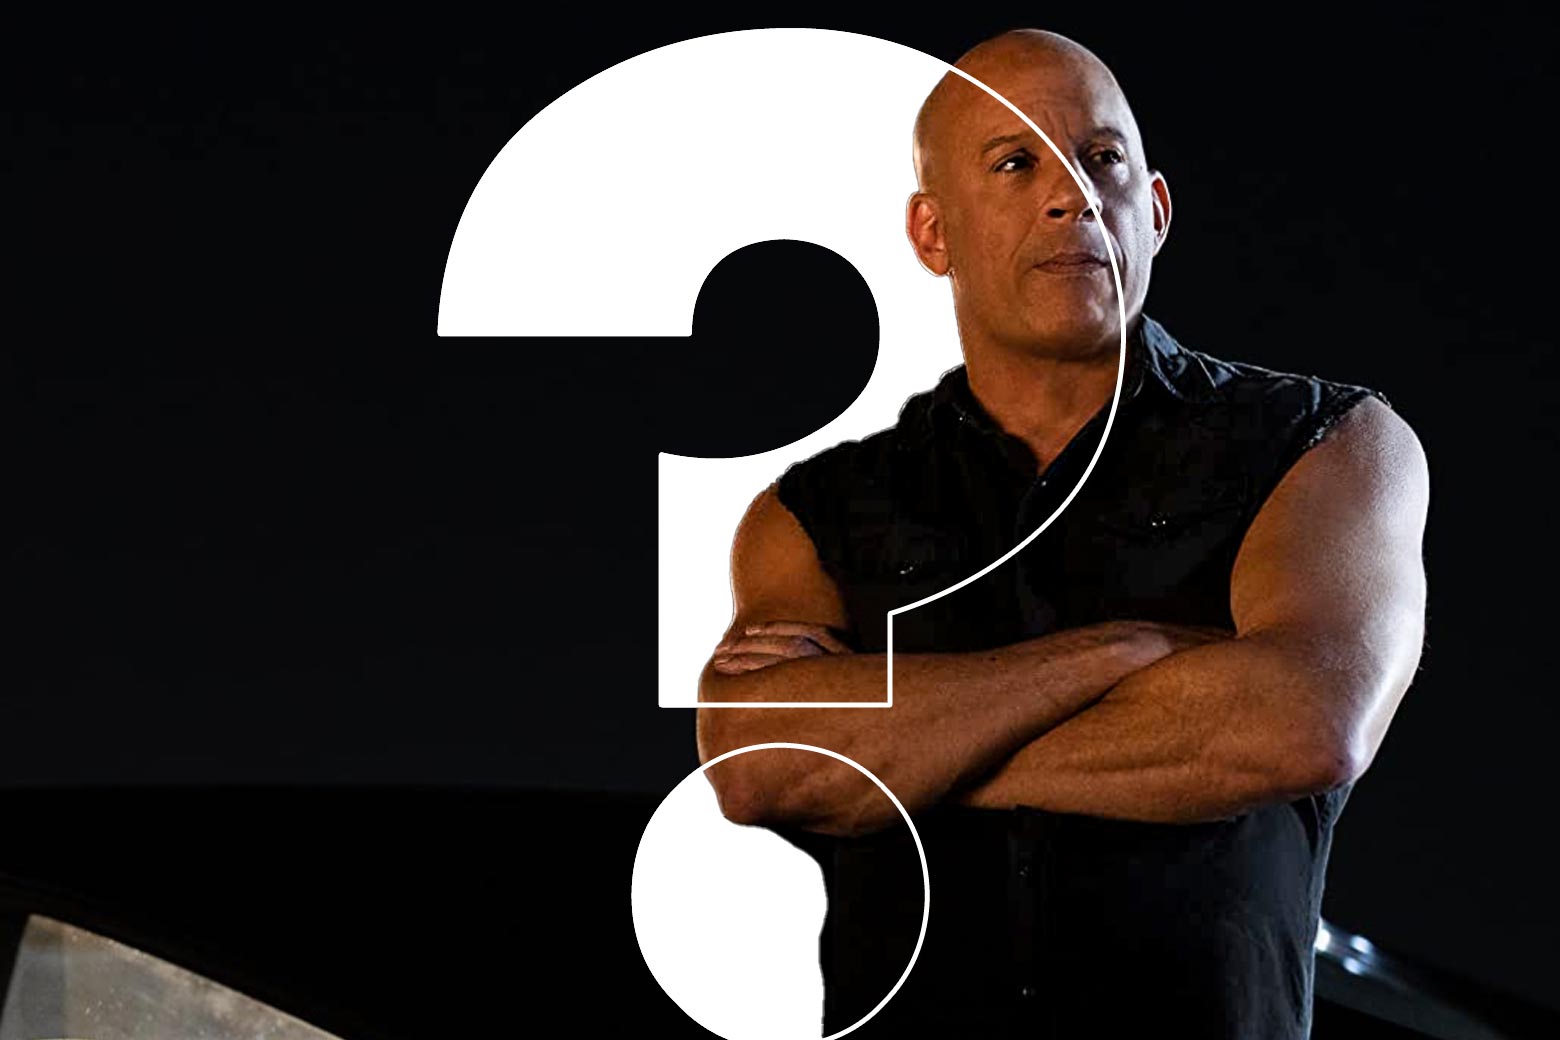 A muscular man crosses his large arms and looks into the distance, with a white question mark superimposed over him.